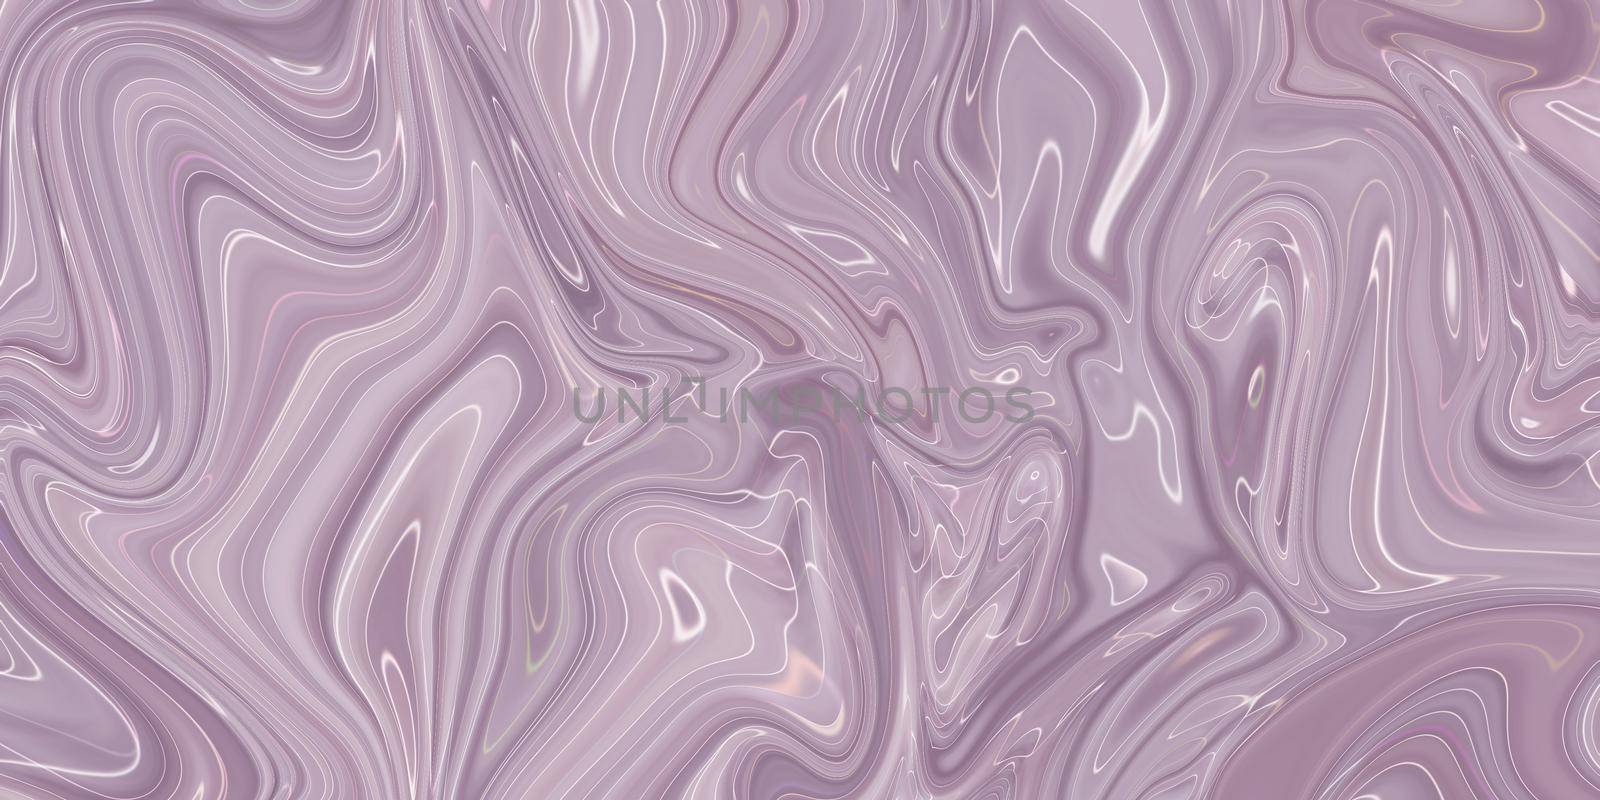 Liquid Purple art painting, abstract colorful background with color splash and paints, modern art.